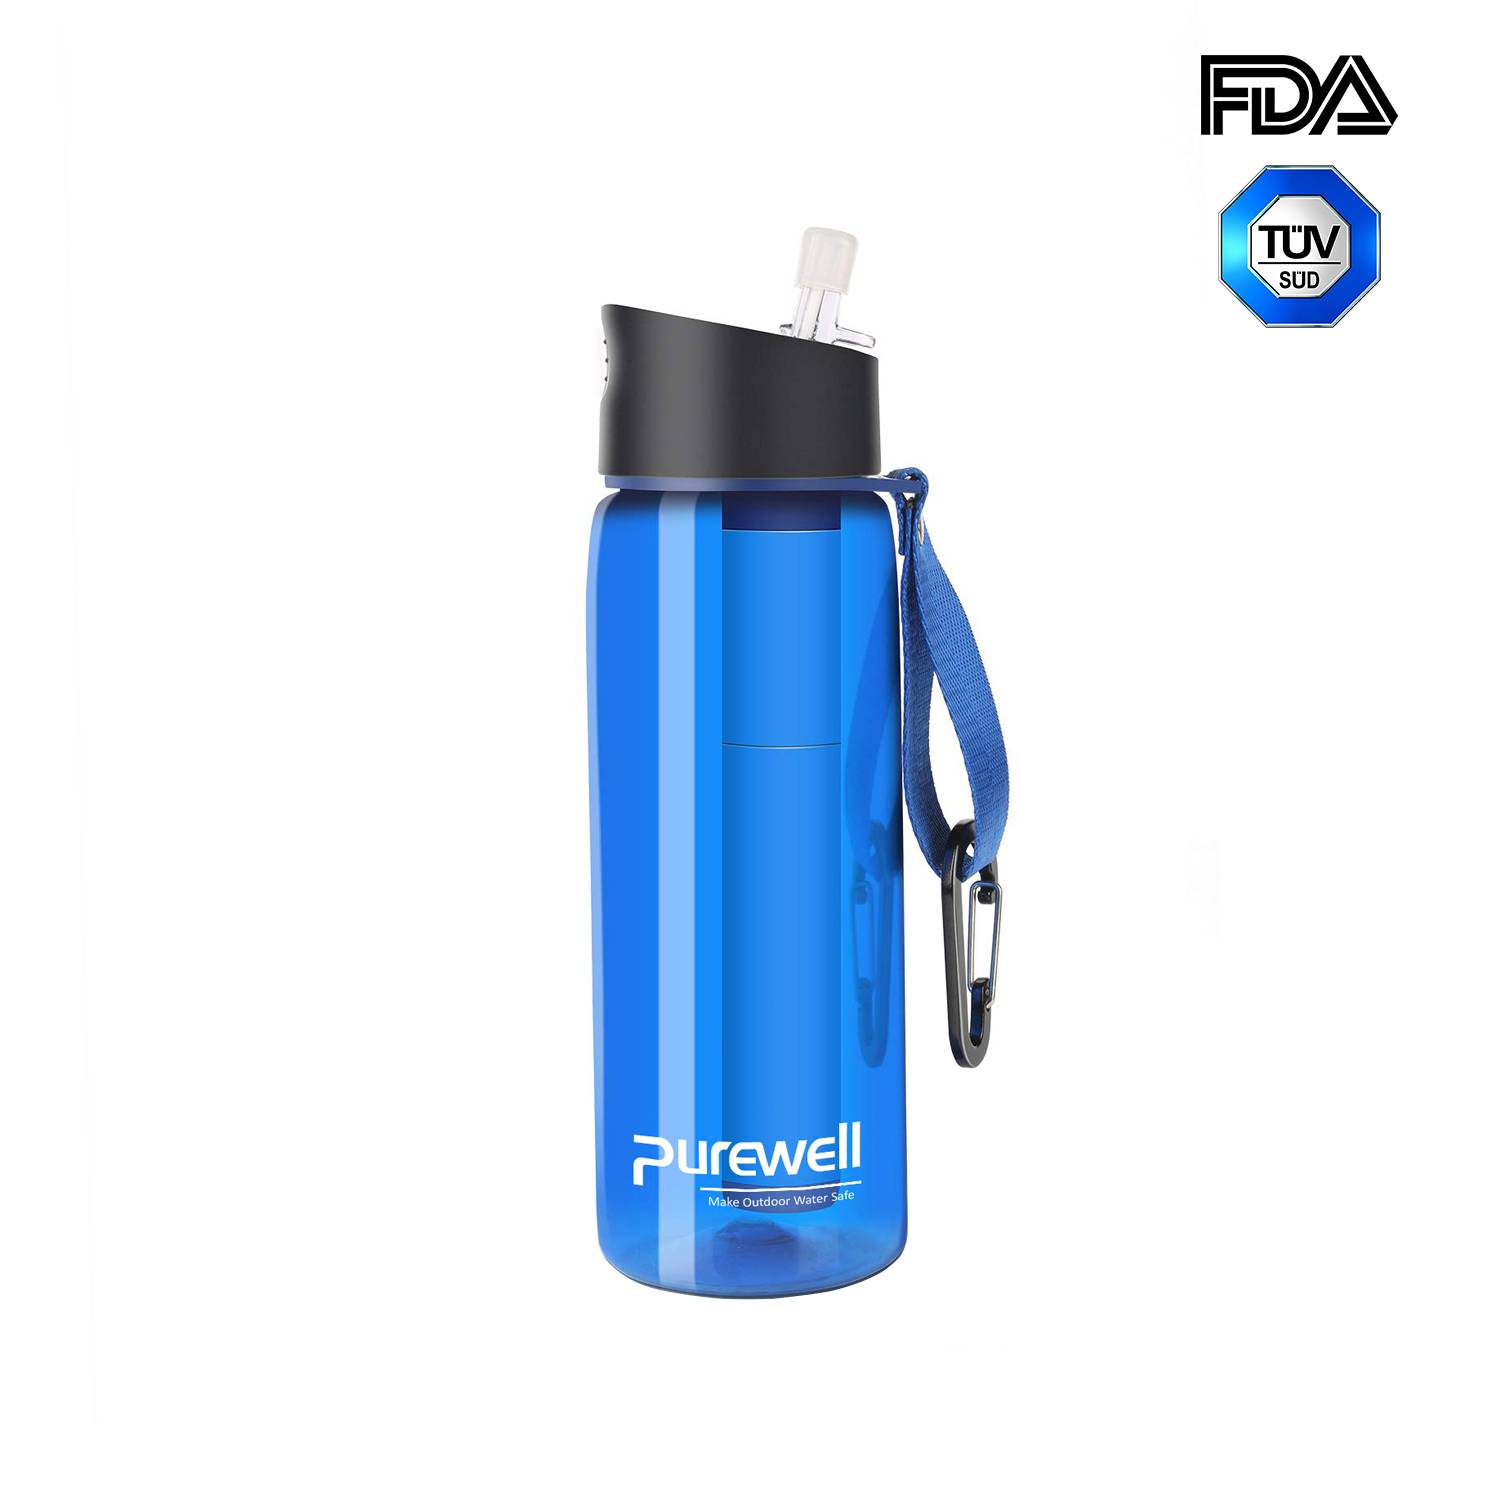 Purewell Personal Water Filter Bottle 650ml alternative to LifeStraw Go